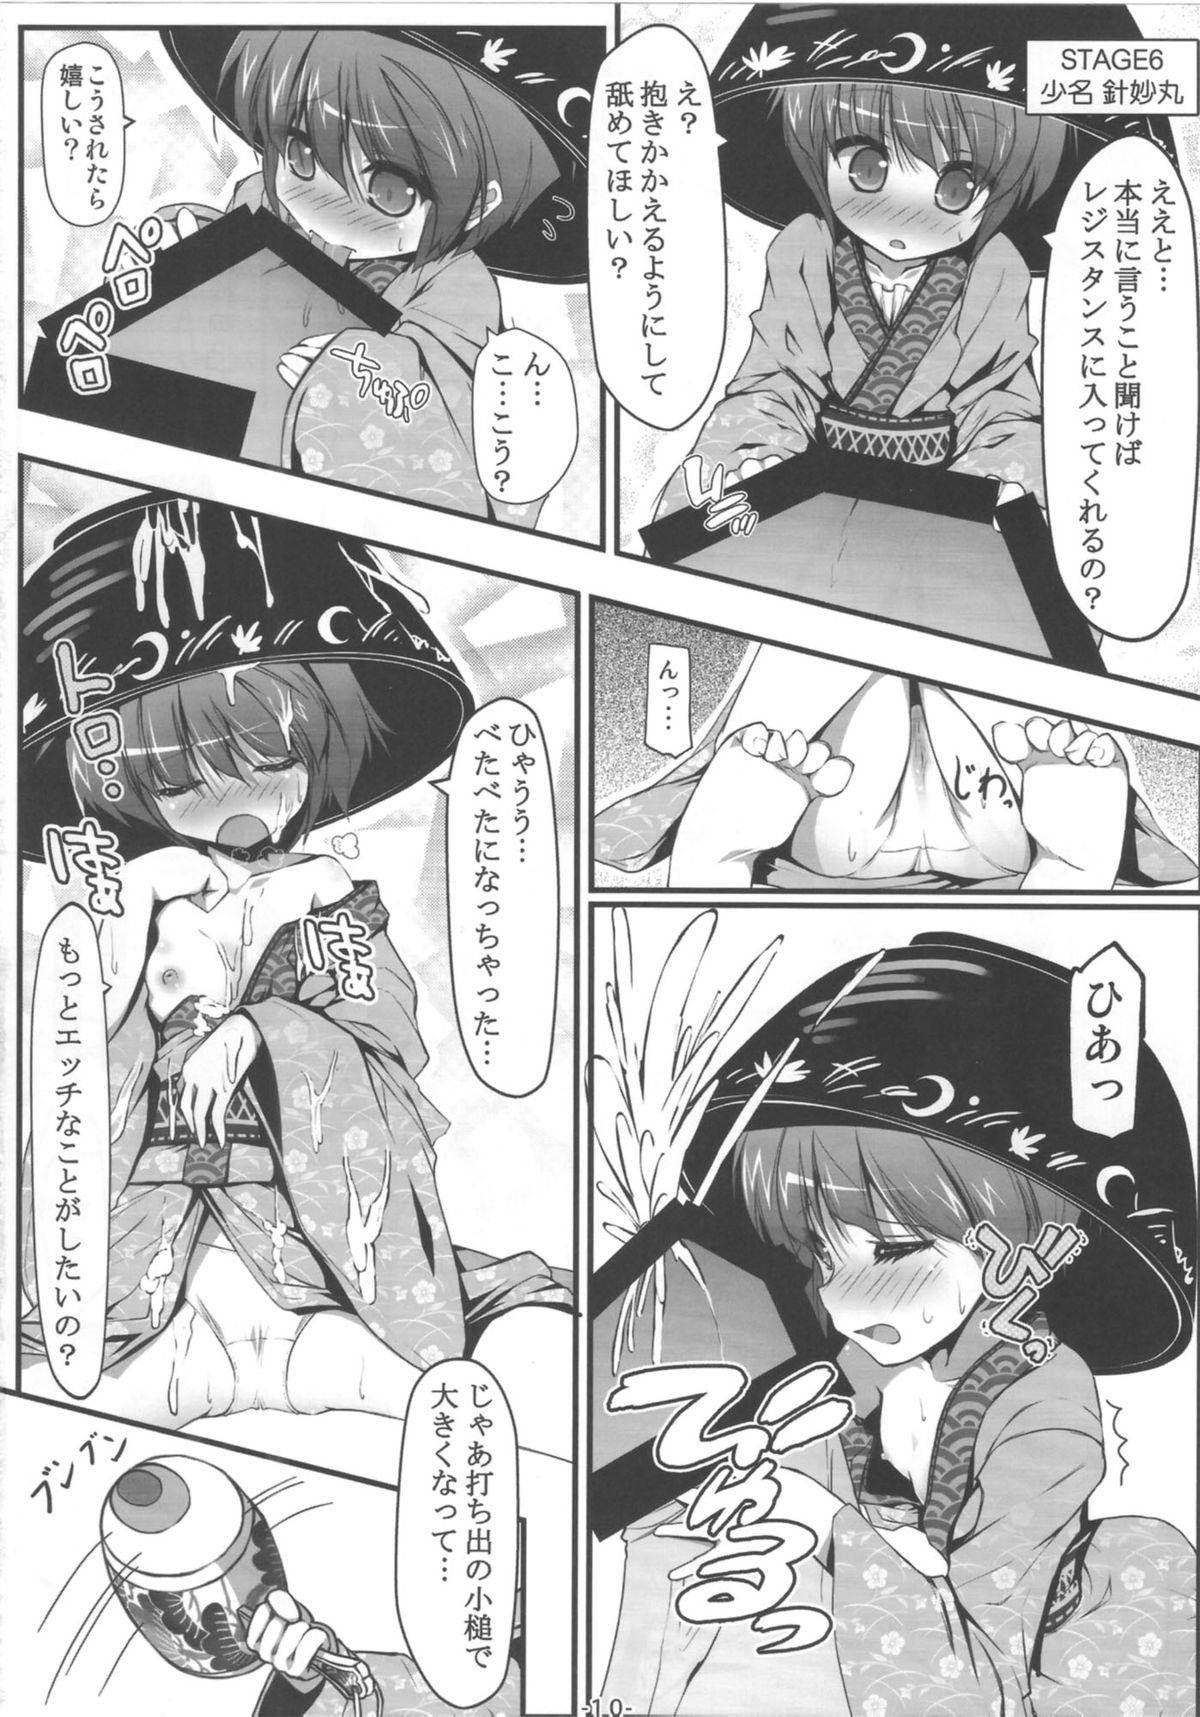 Morocha Ookikuna ~ Re!? - Touhou project Officesex - Page 11